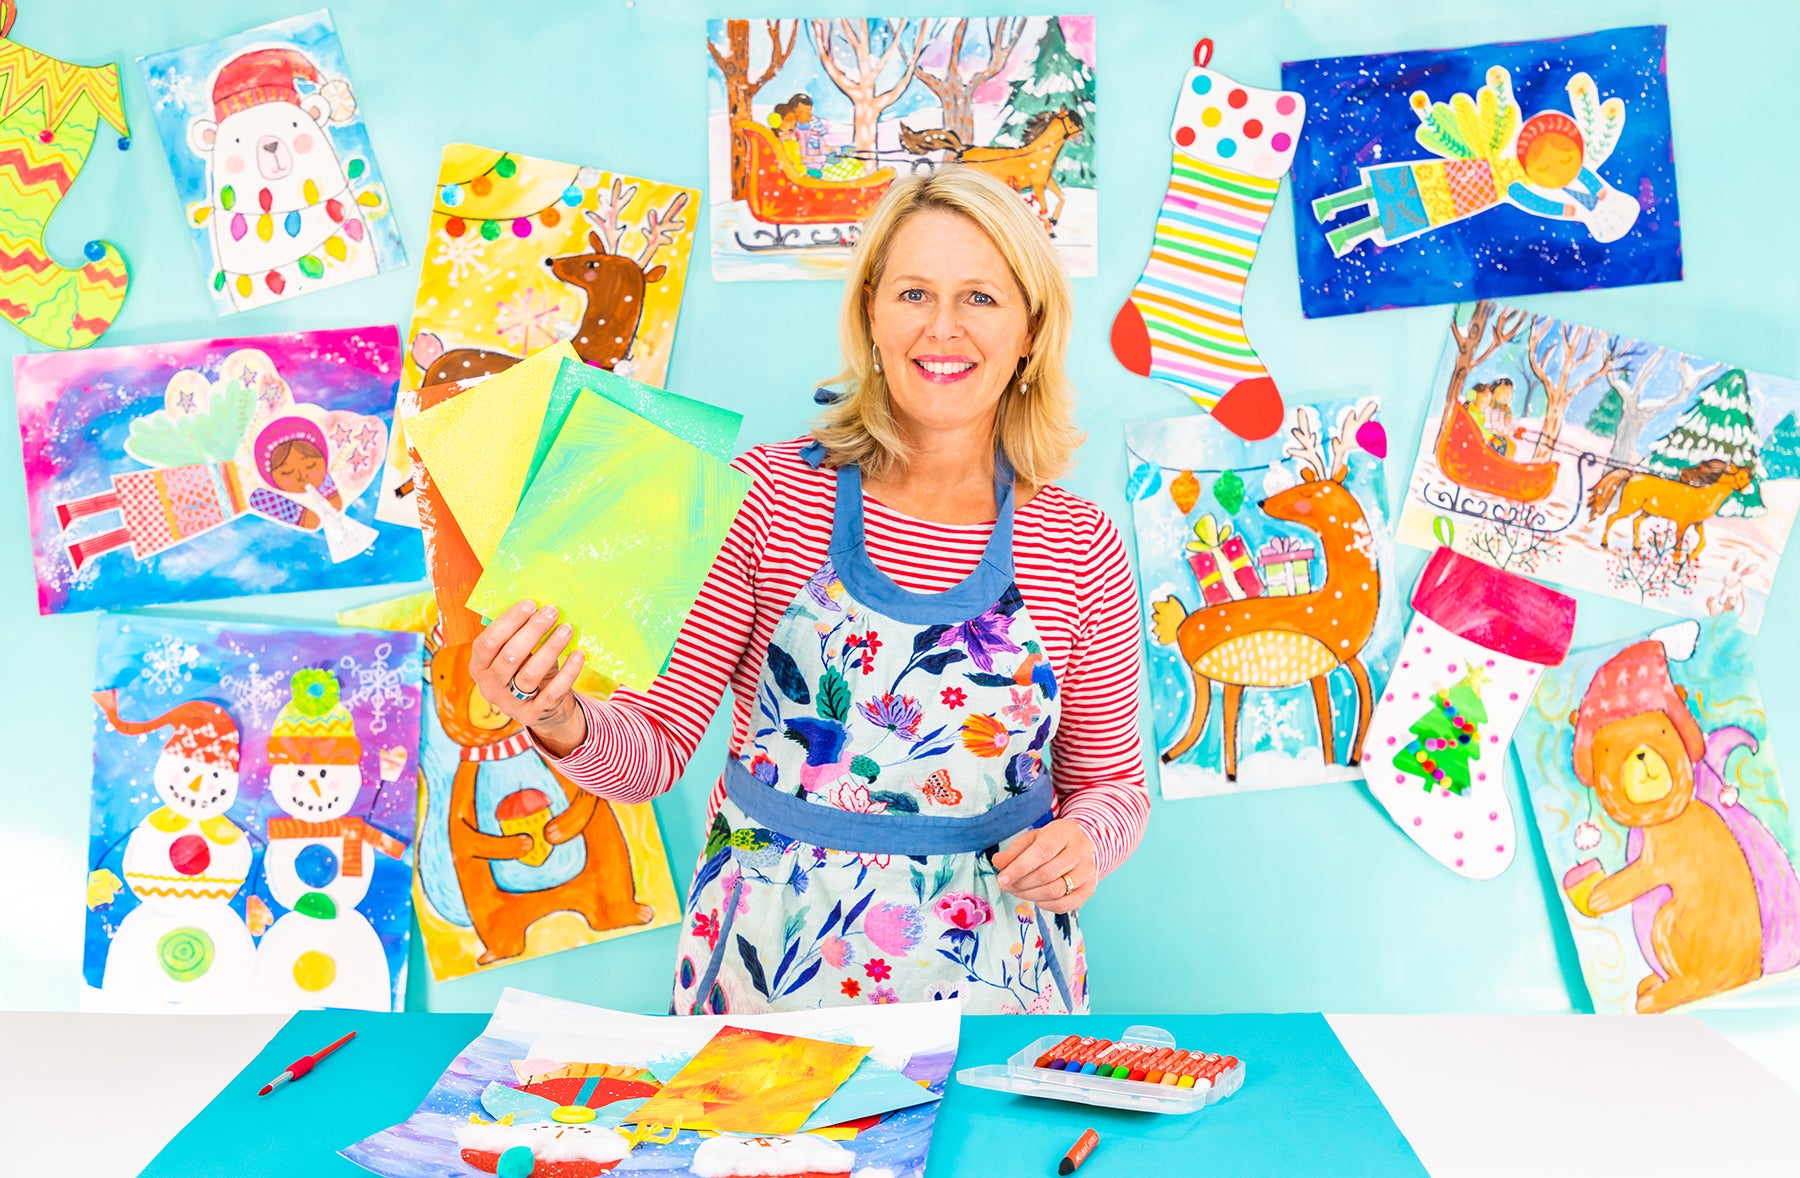 Making Painted Paper at Home with Miss Patty from Primerry | Online Art Classes for Kids